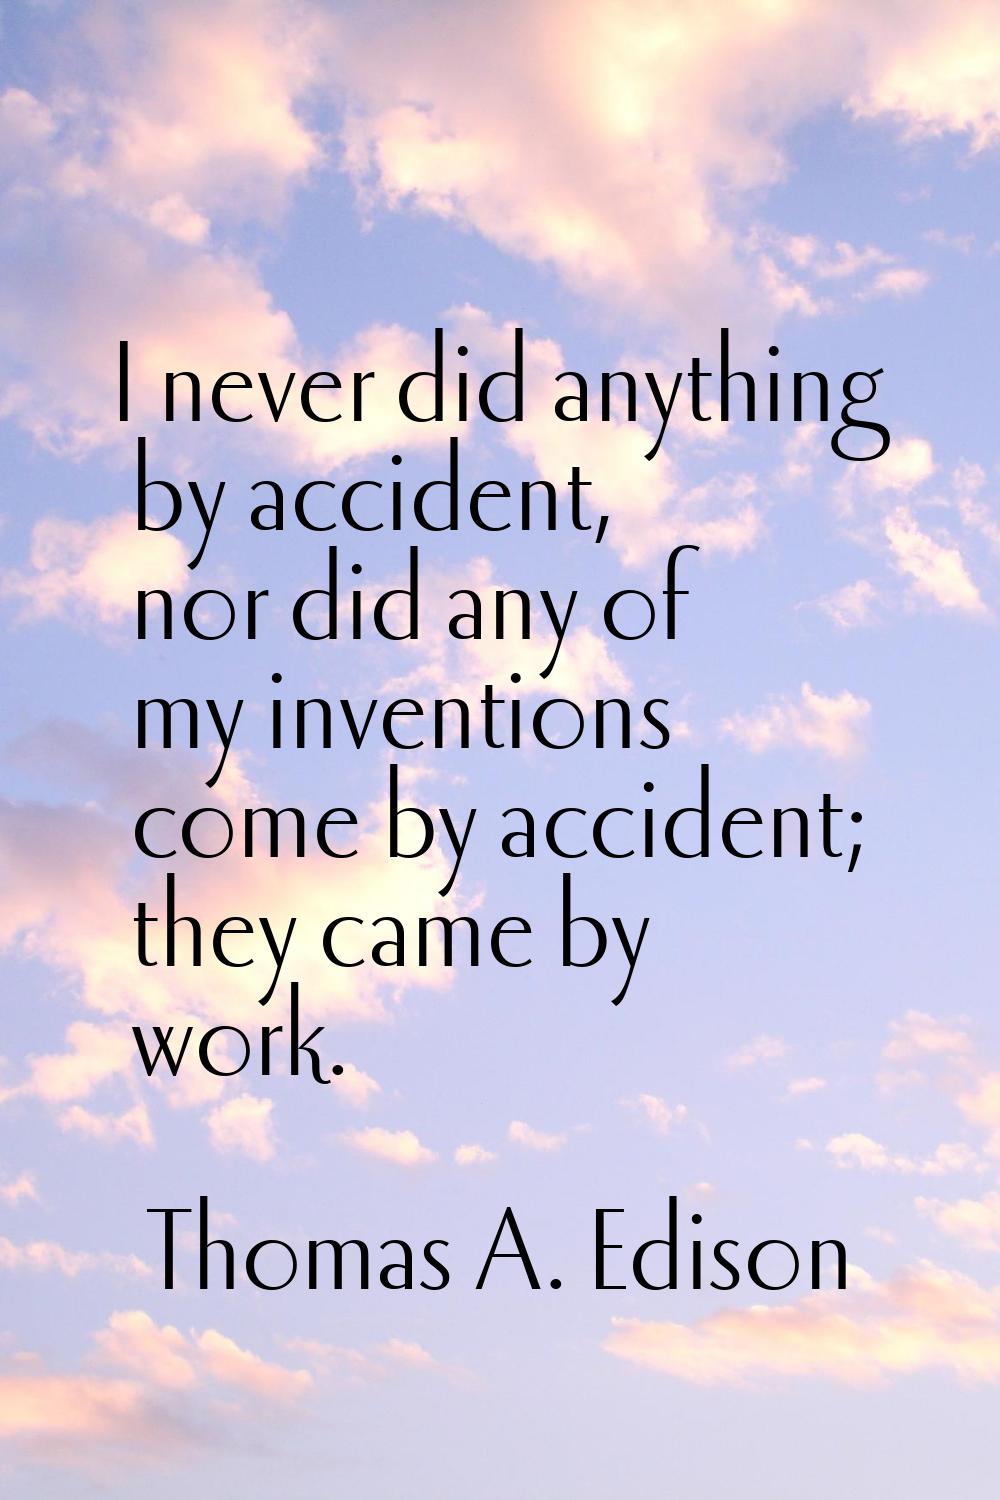 I never did anything by accident, nor did any of my inventions come by accident; they came by work.